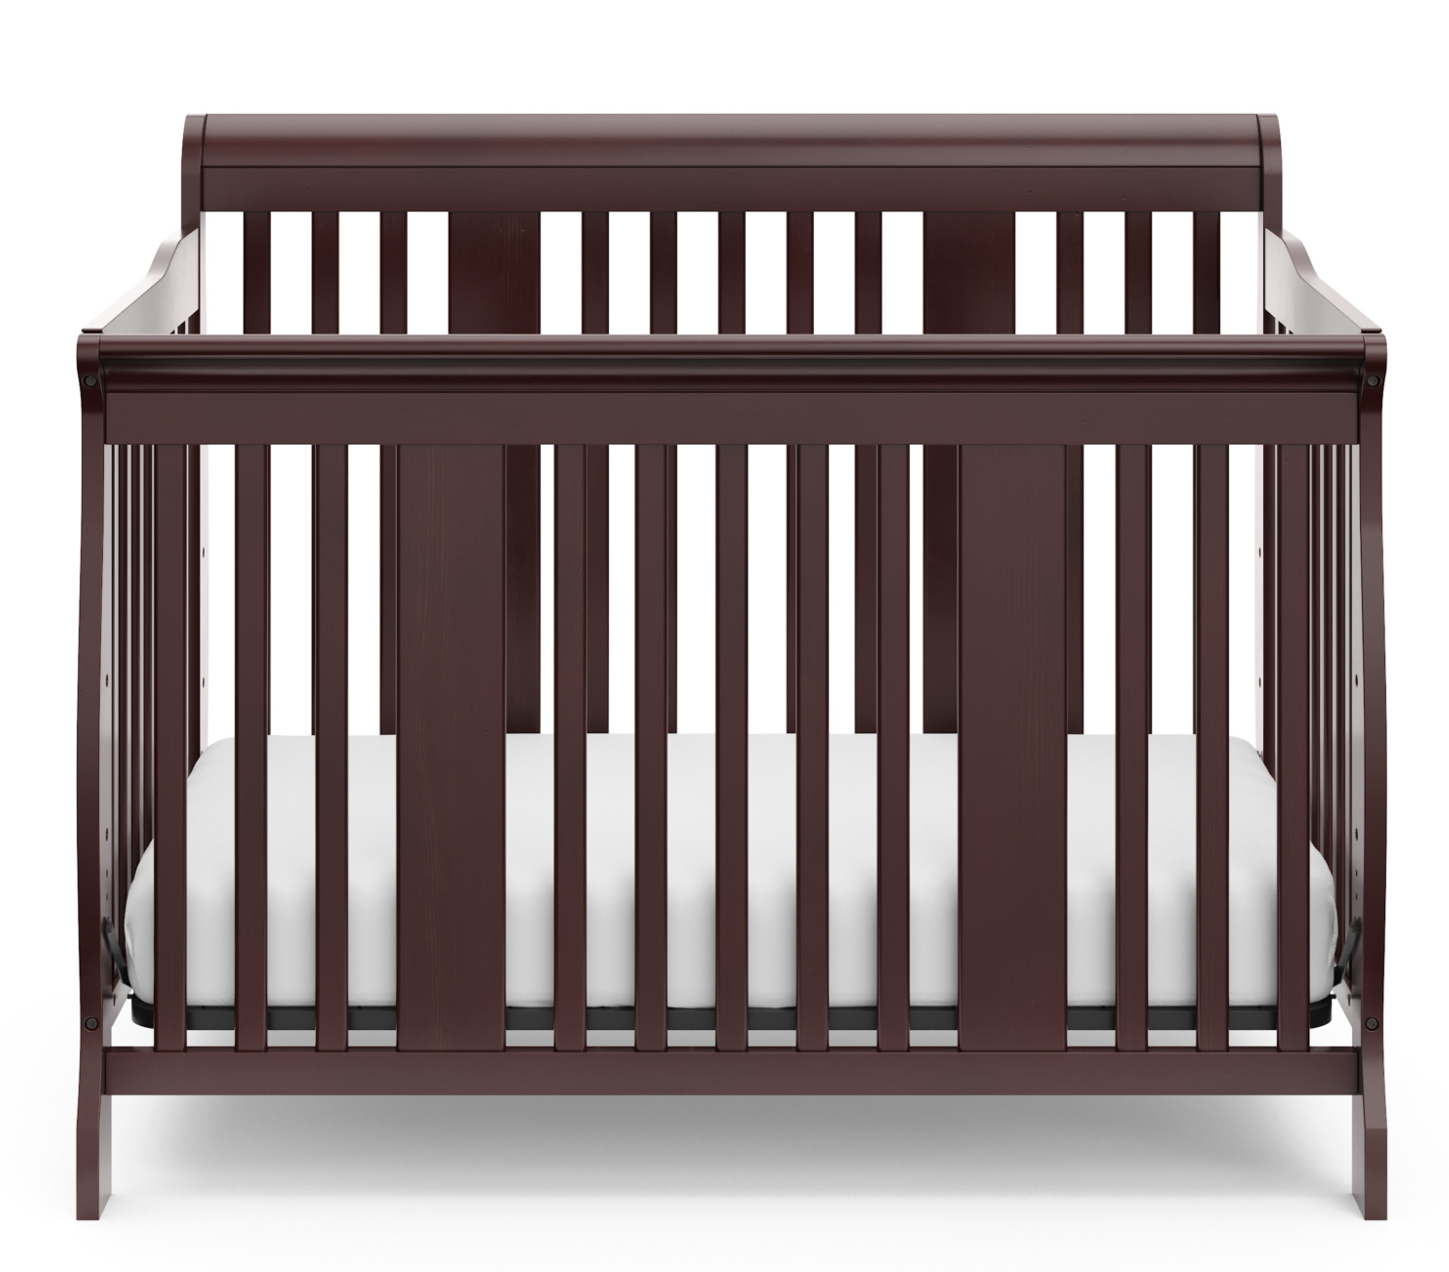 Storkcraft Tuscany 4-in-1 Convertible Baby Crib Espresso - image 3 of 9